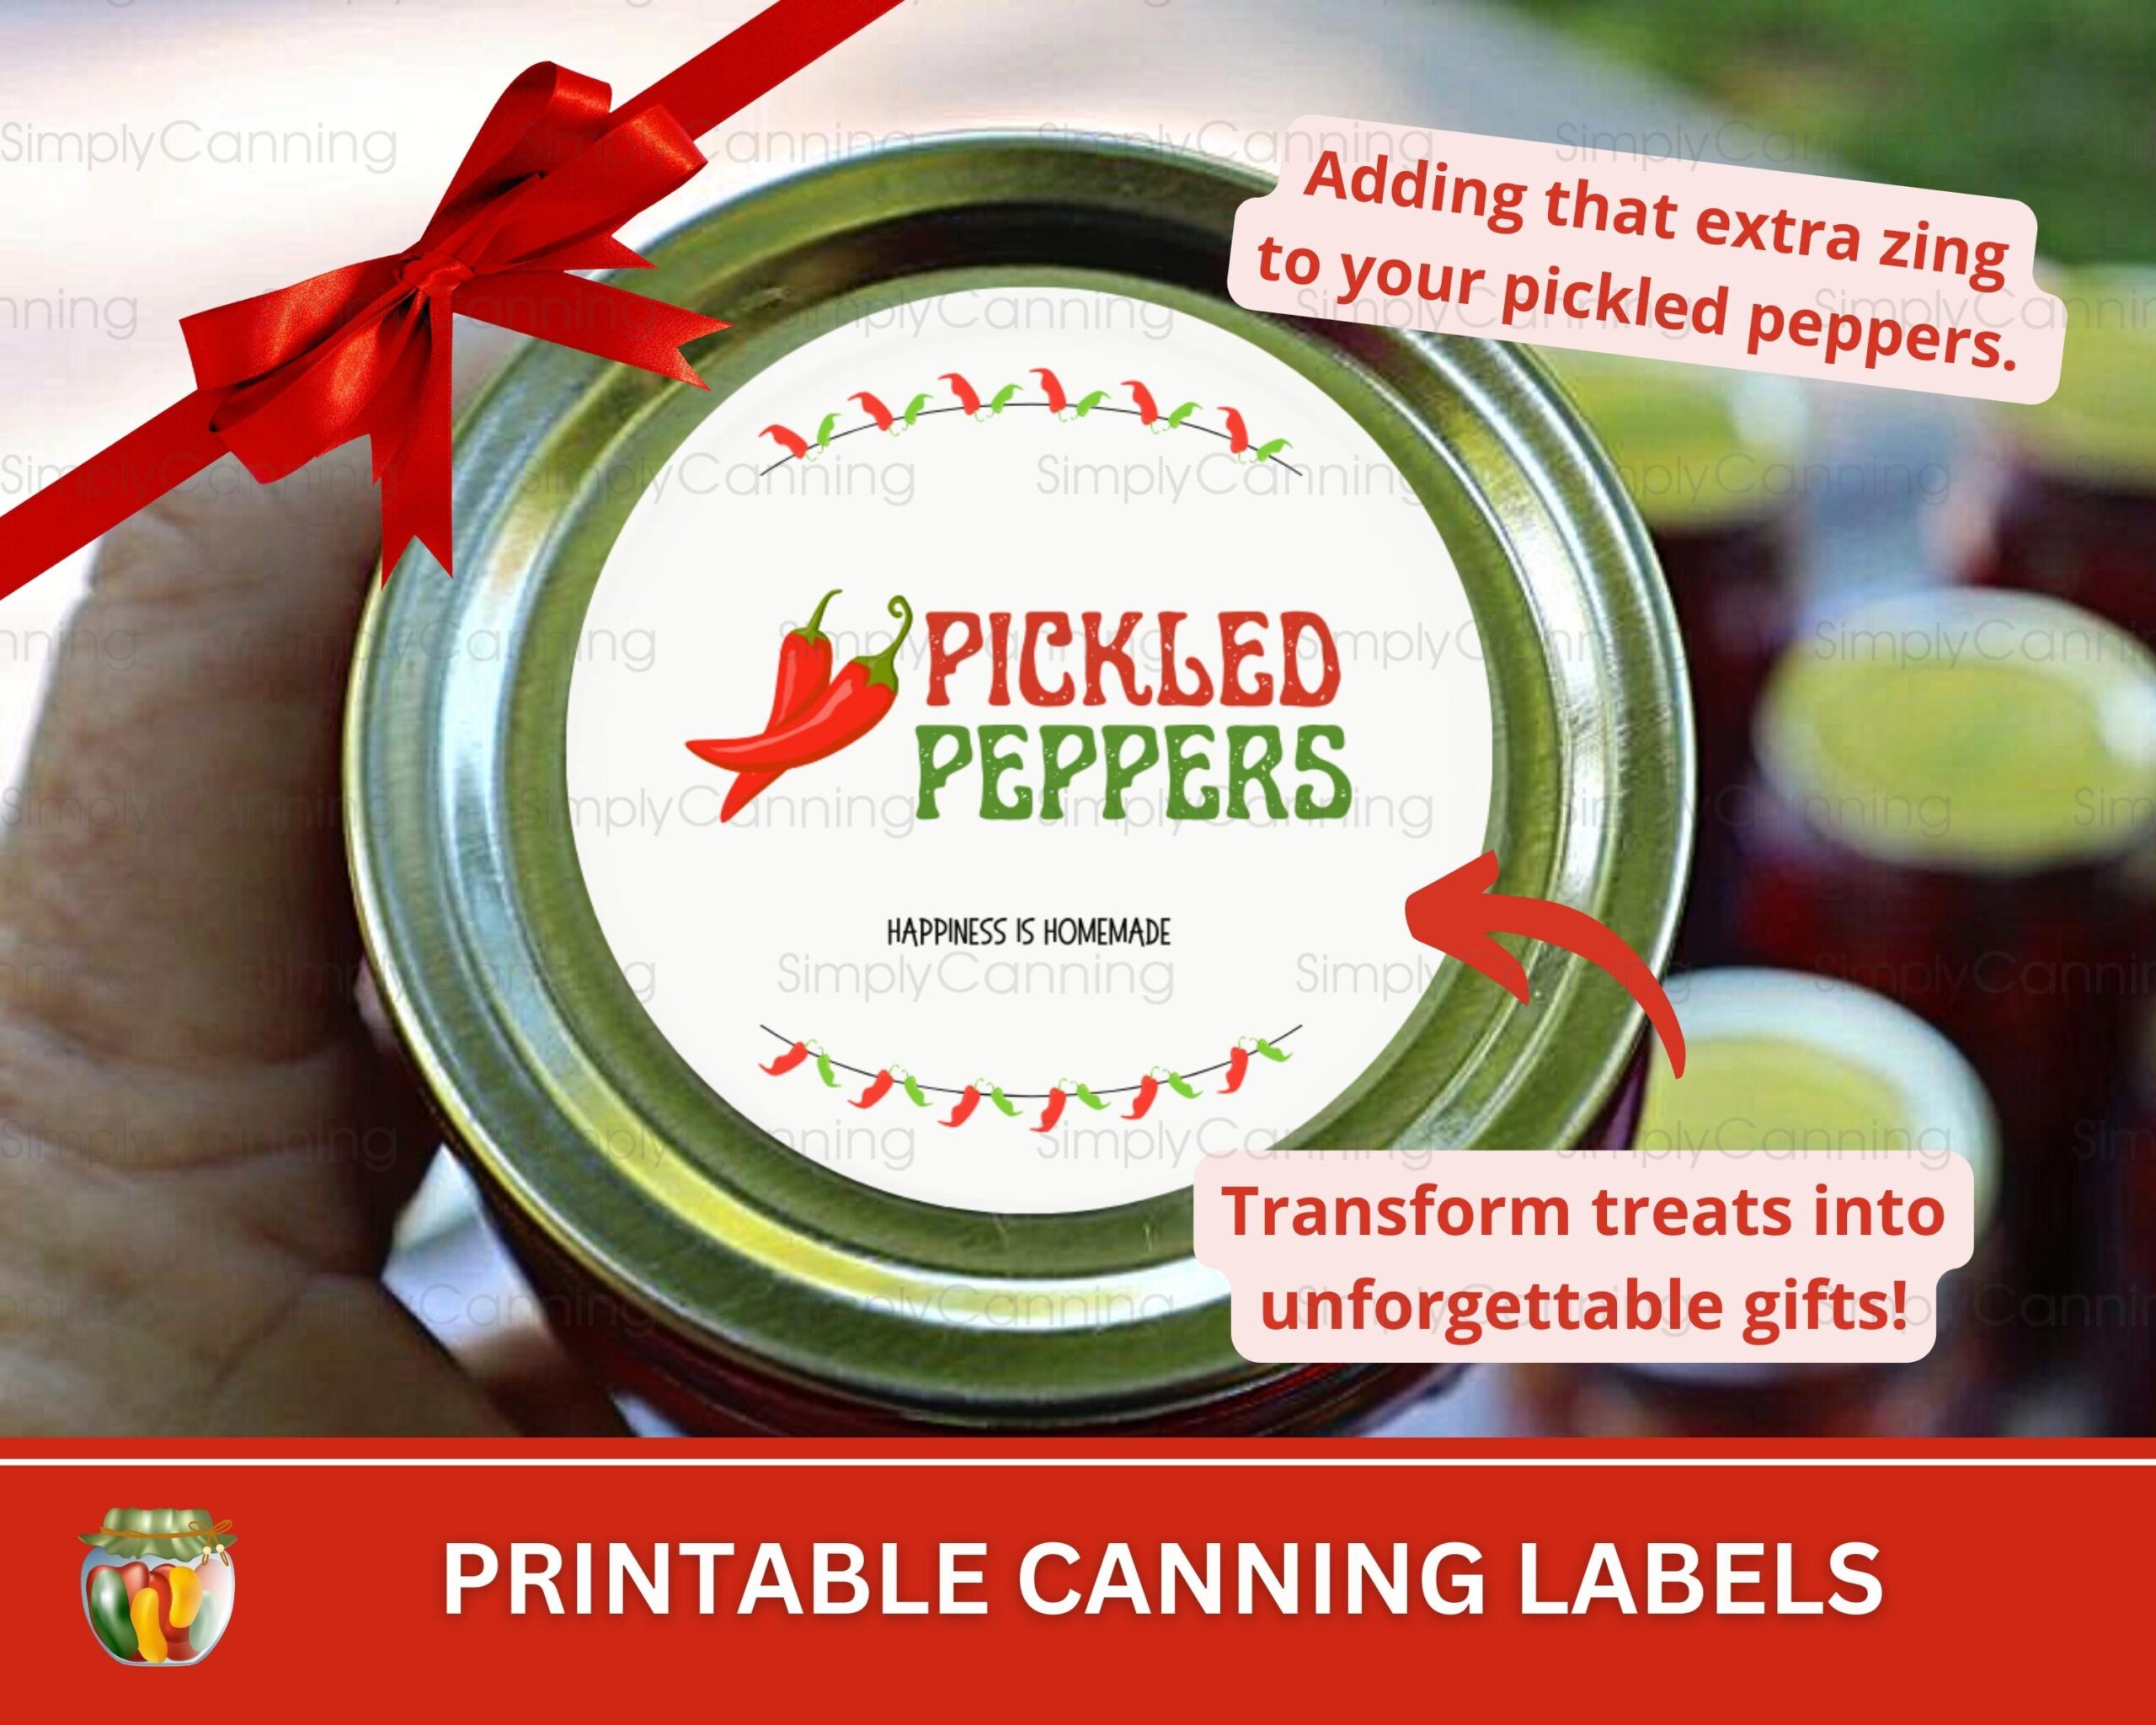 Image of pickled peppers canning label, links to printable canning labels to purchase.